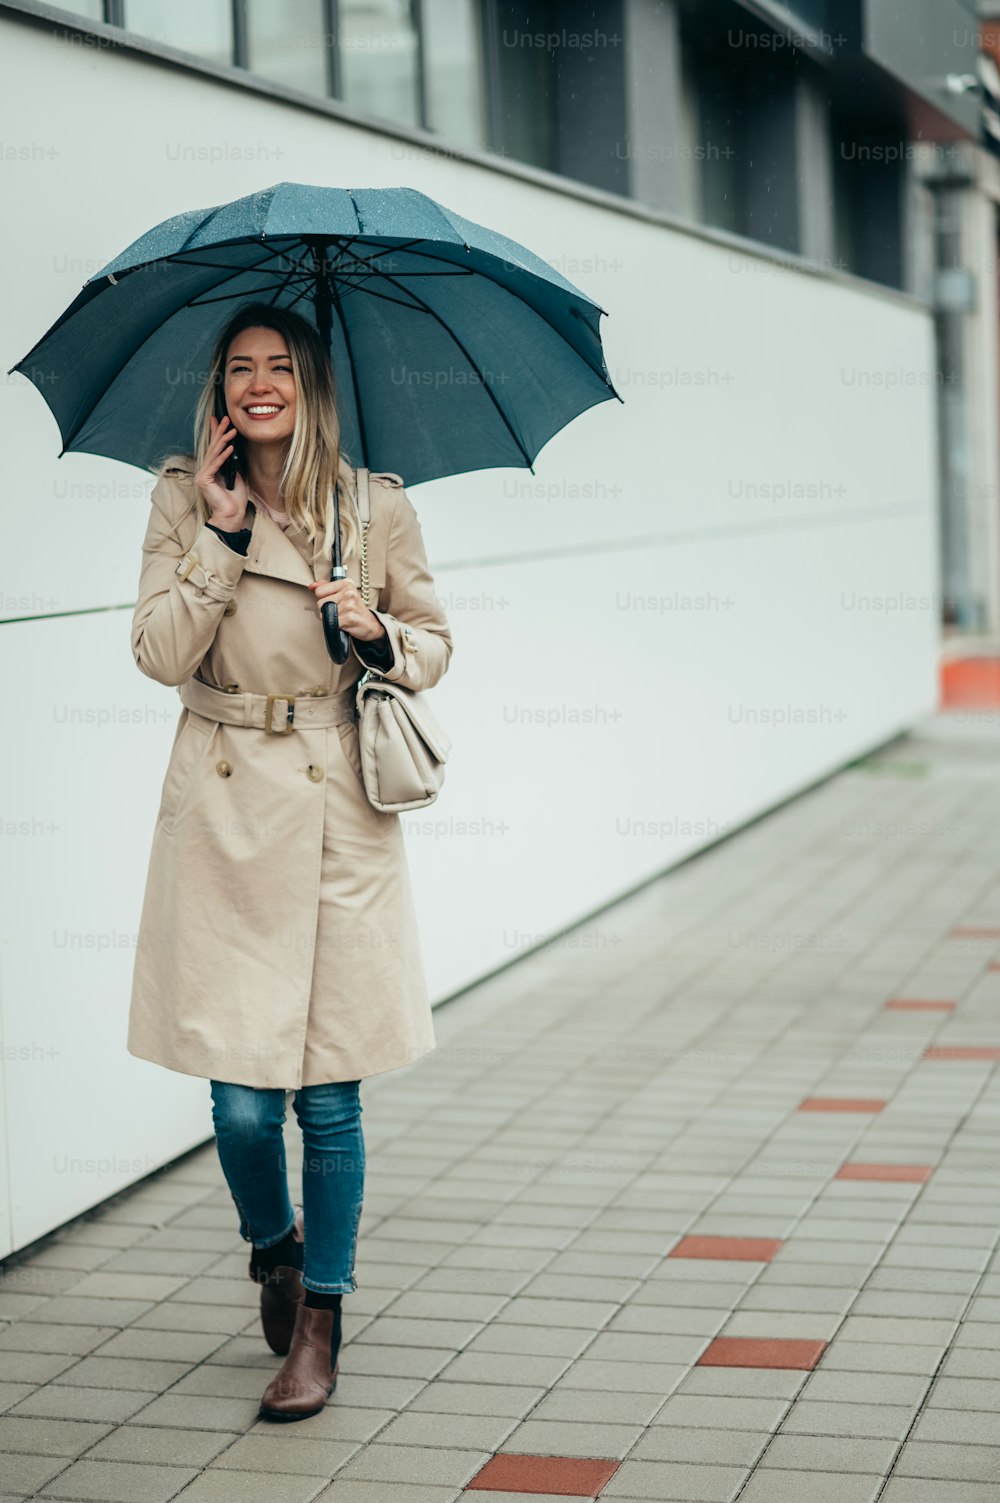 Young smiling businesswoman with umbrella and shoulder bag using smartphone and walking down city street during rain